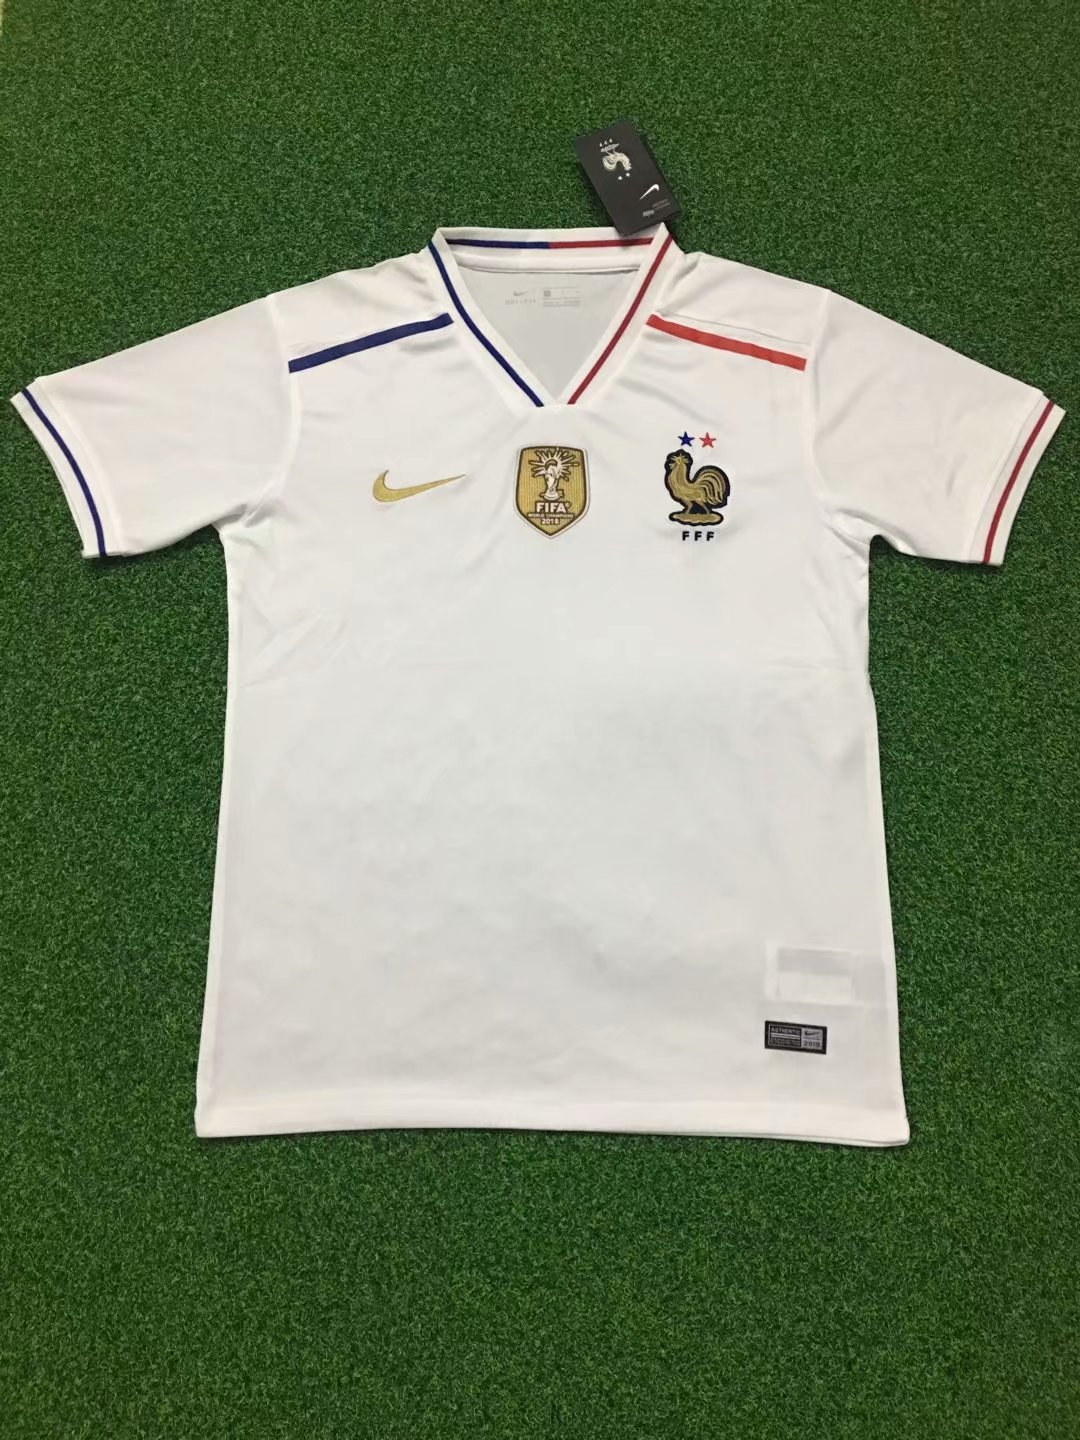 http://www.maillotfactory.com/images/Maillot%20France%2020192003.jpg